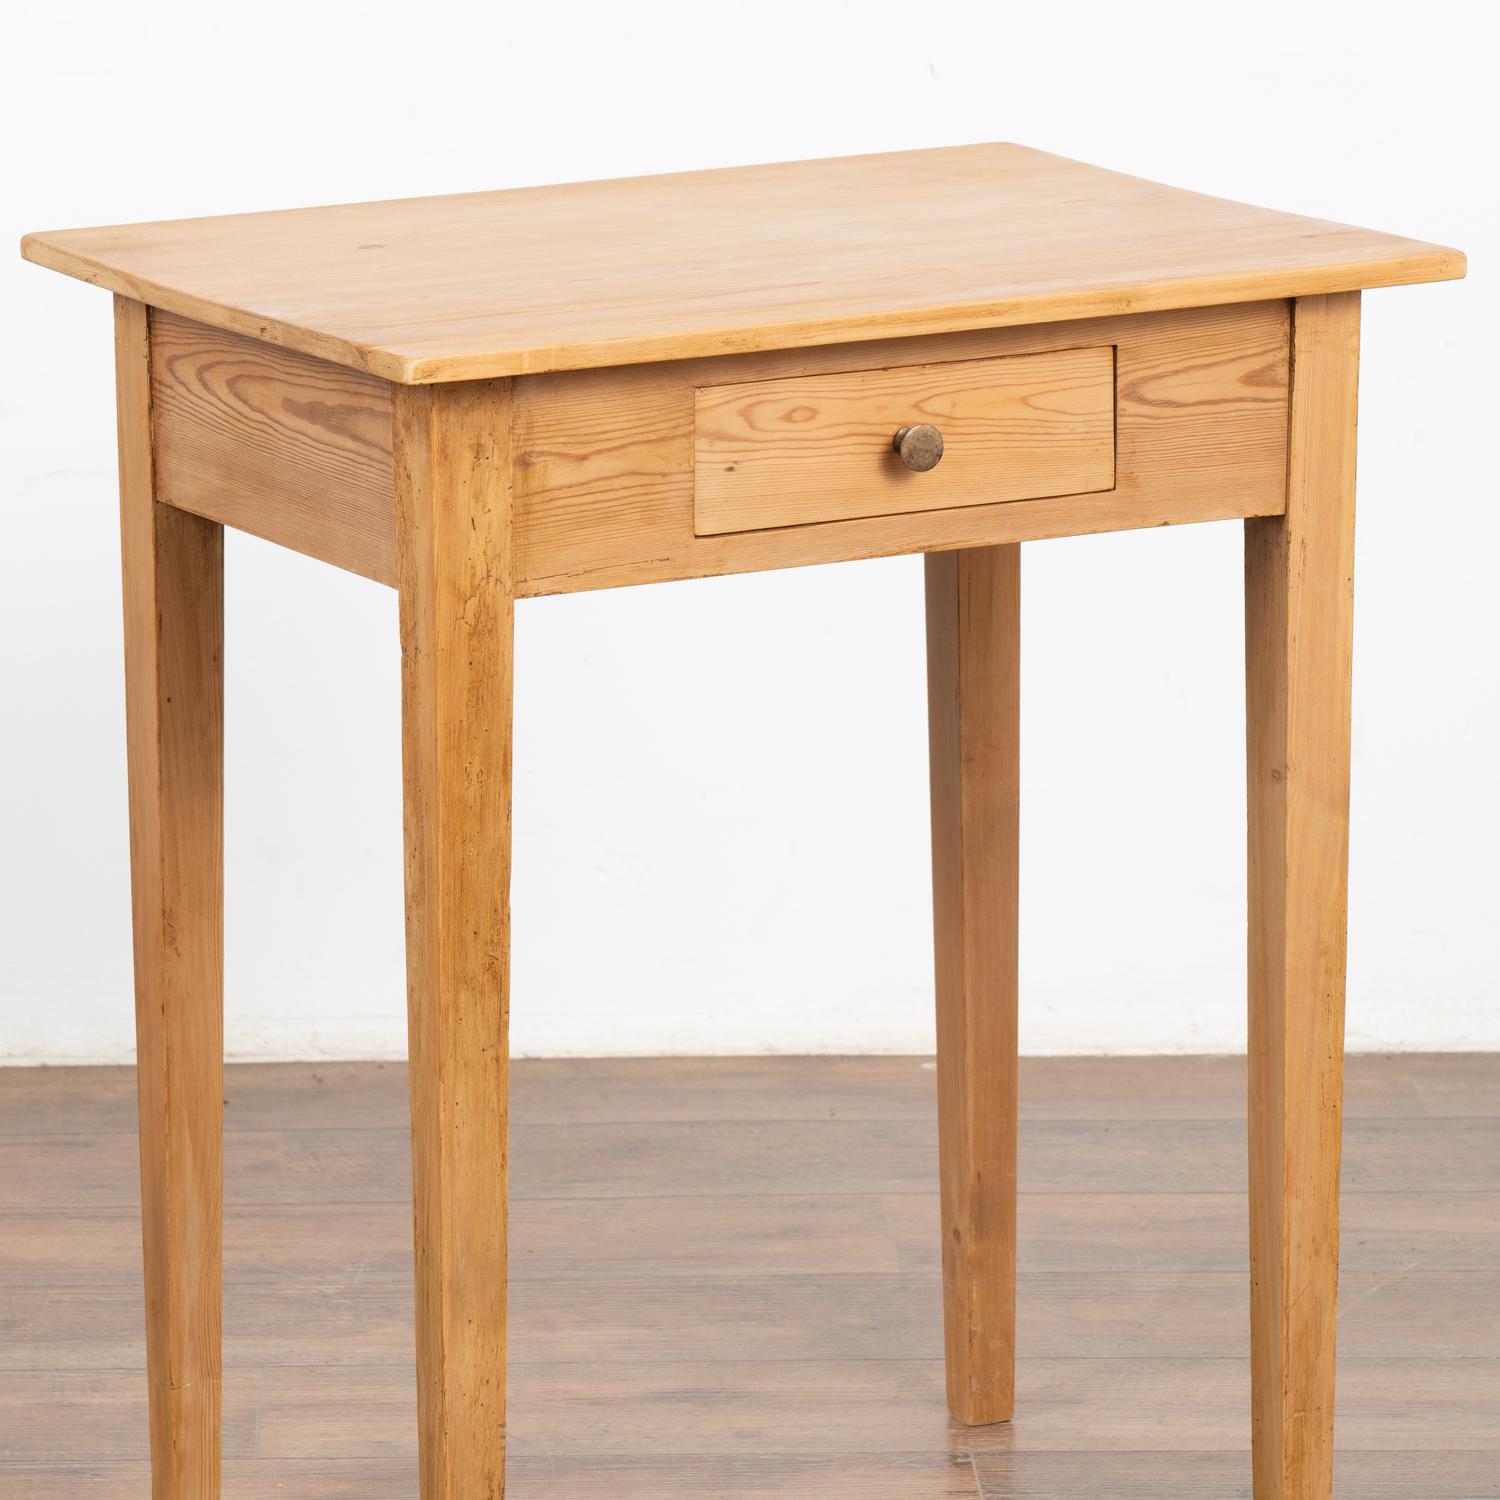 Small Pine Side Table With Tapered Legs, Denmark circa 1900's For Sale 1